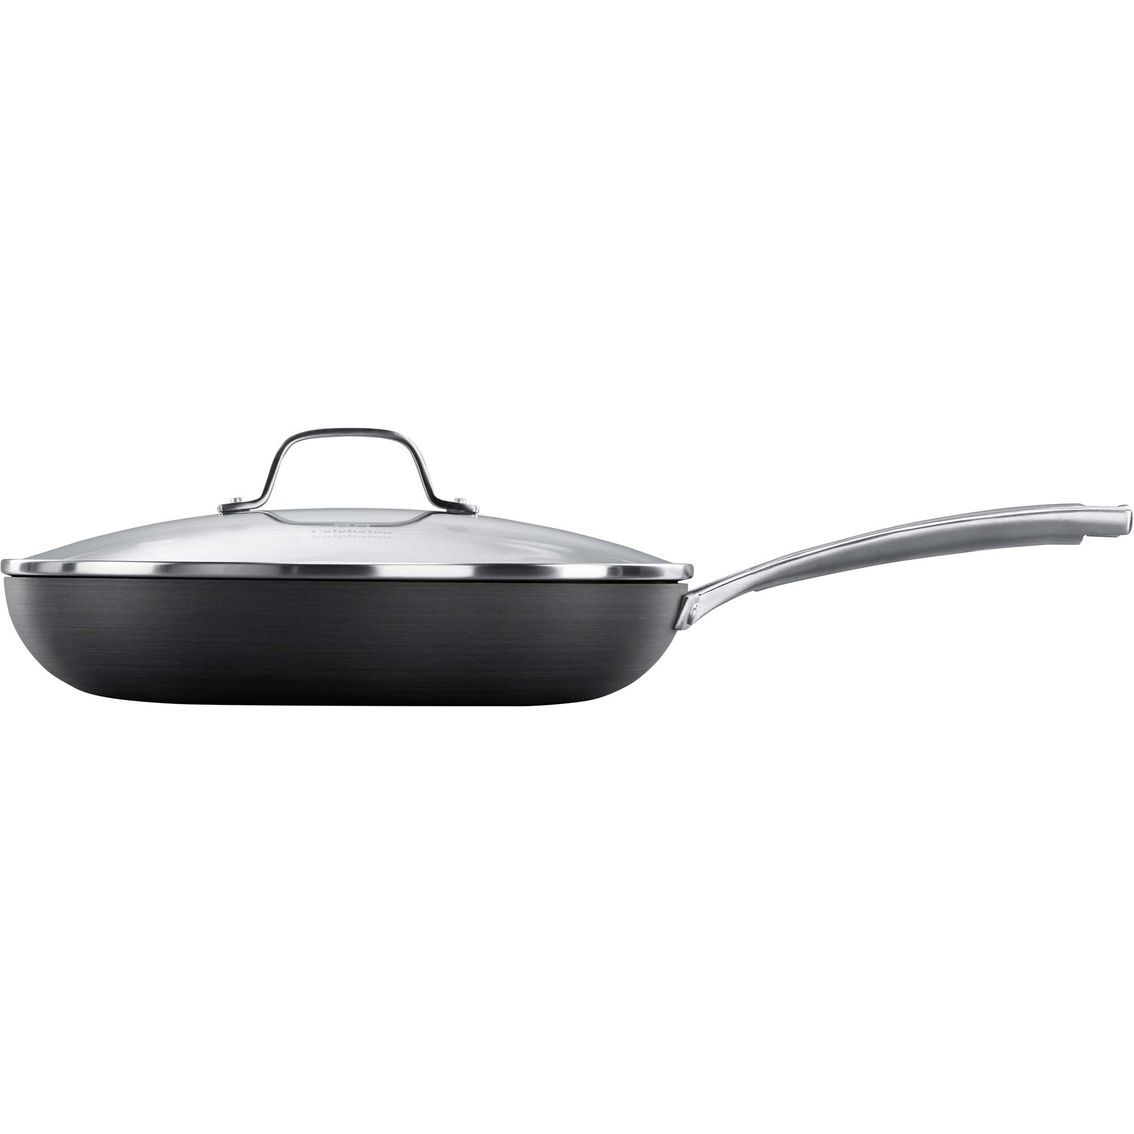 Calphalon Classic Nonstick 12 In. Fry Pan With Cover, Fry Pans & Skillets, Household